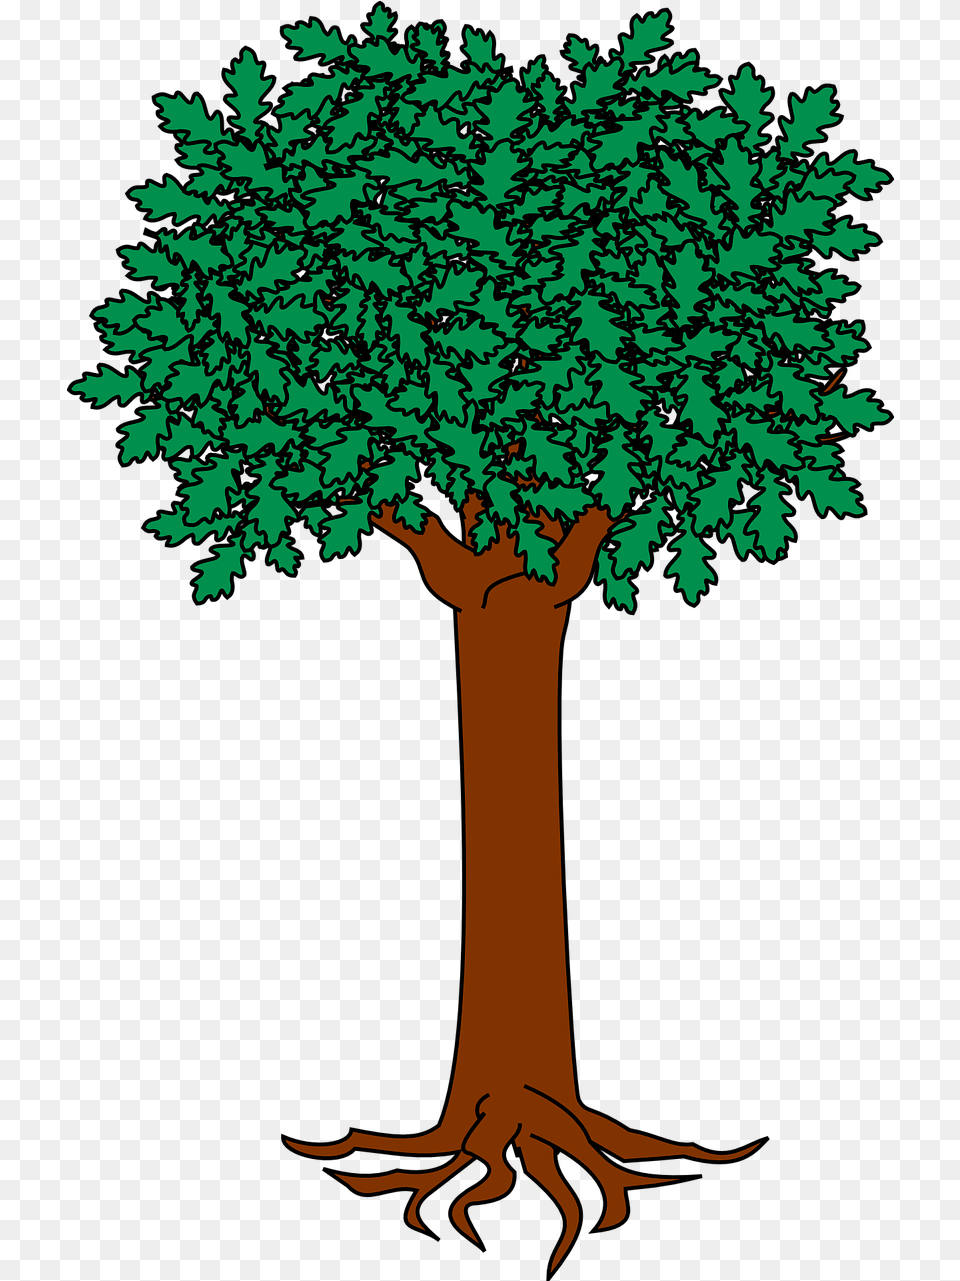 Download Photo Of Treeheraldicsymboldesignicon Tree Symbol For Coat Of Arms, Plant, Vegetation, Root, Art Free Transparent Png